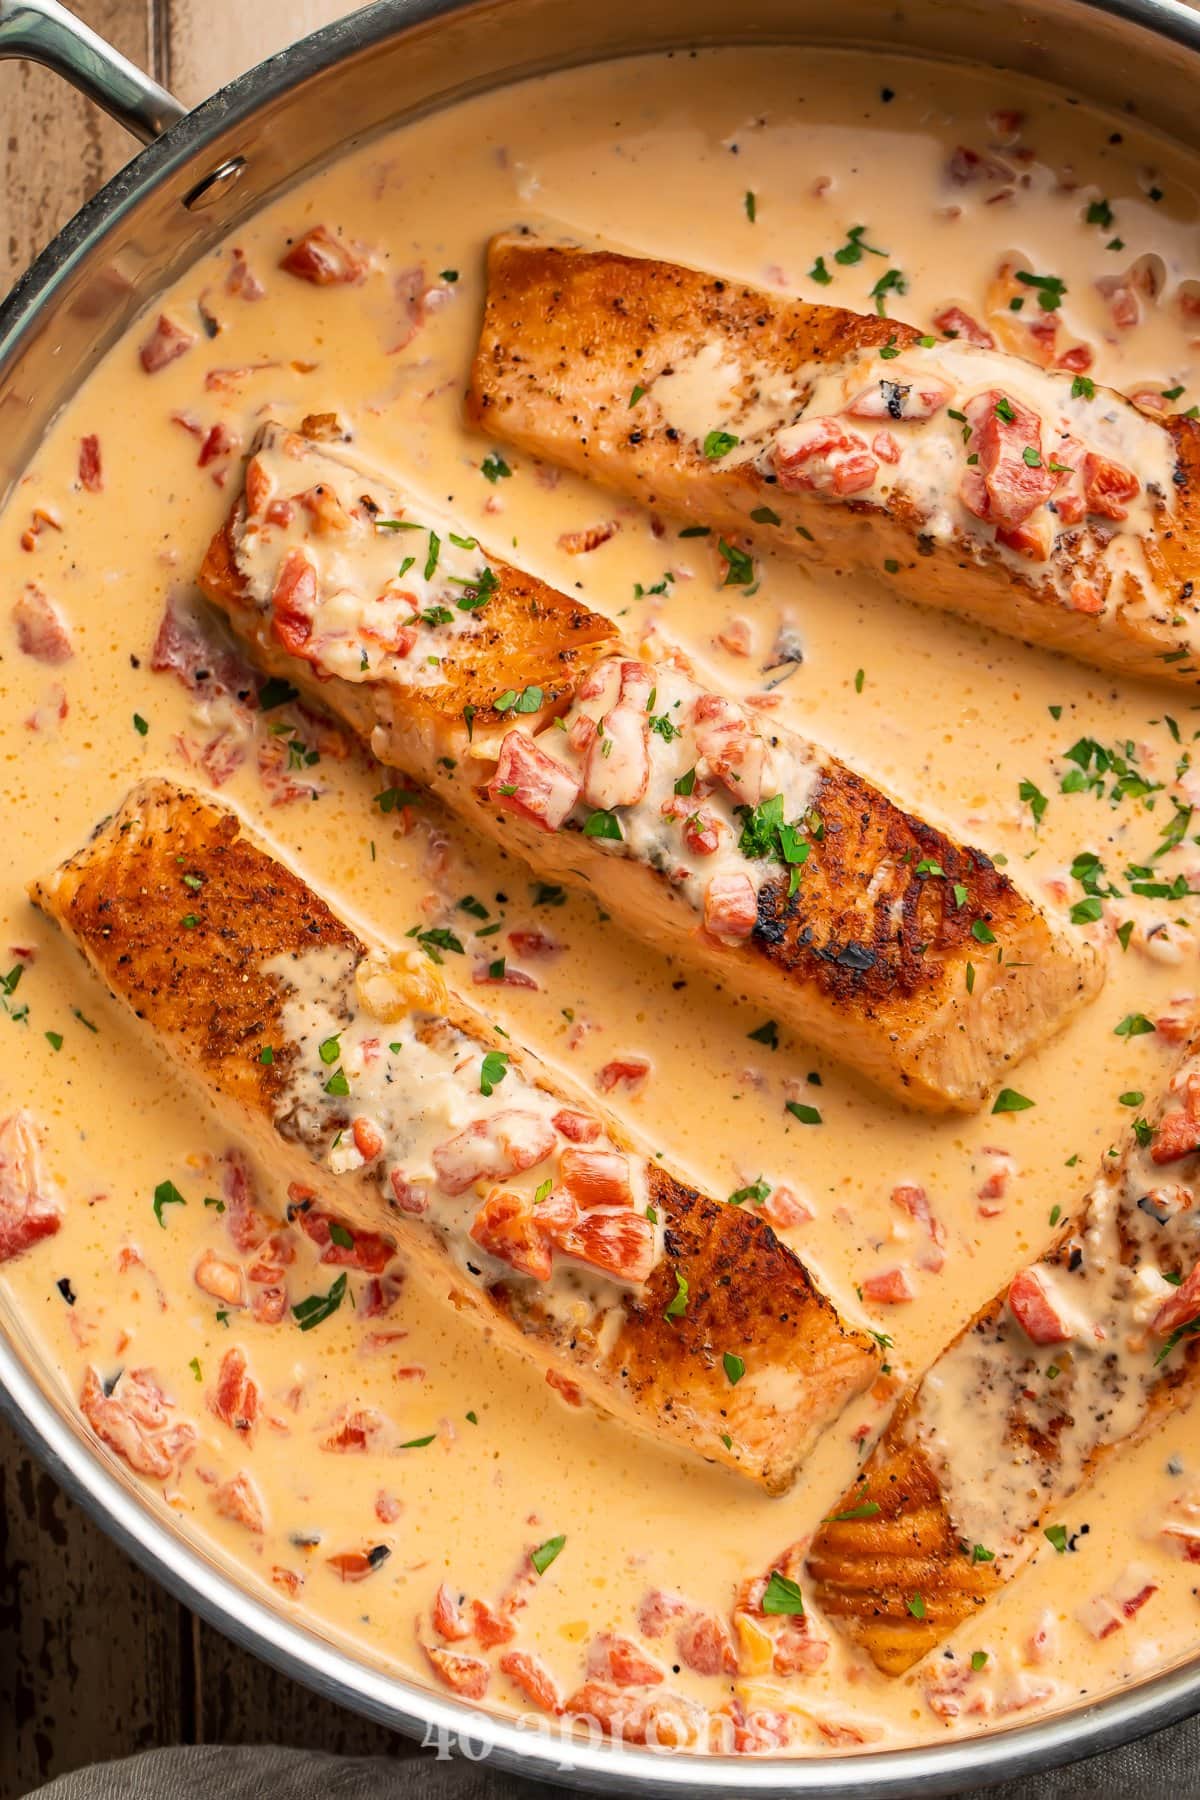 Cream Sauces for Salmon: Enhancing Seafood Dishes with Creamy Sauces